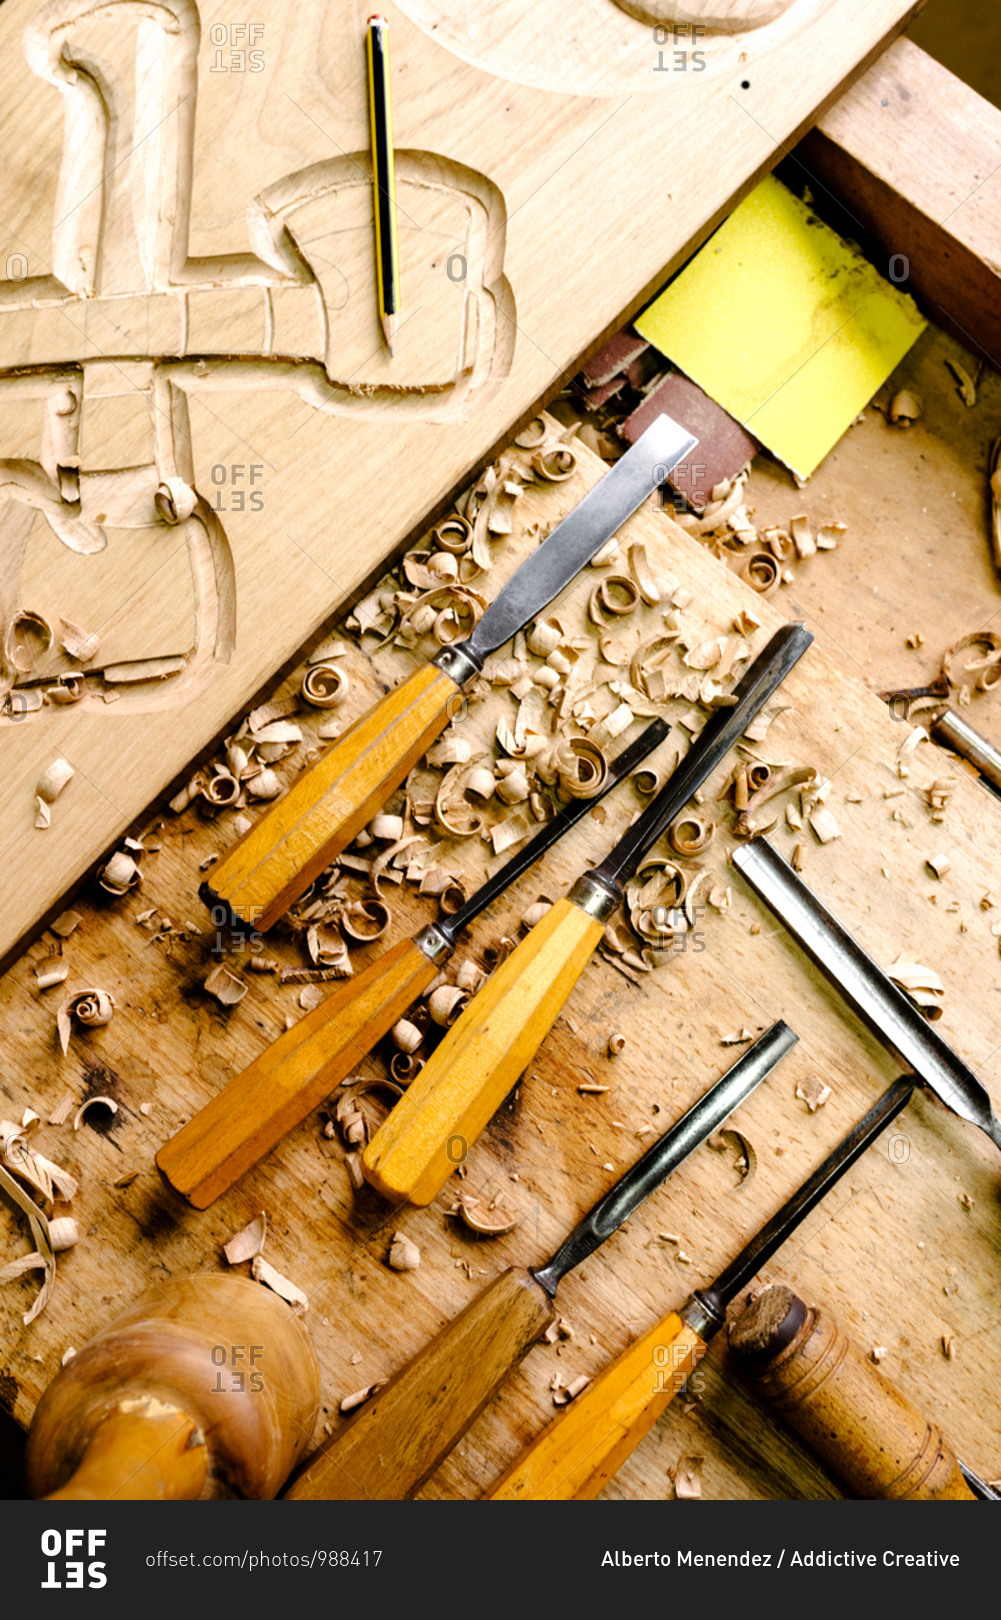 Top view of set of various chisels for wood carving placed on messy workbench with wood shavings